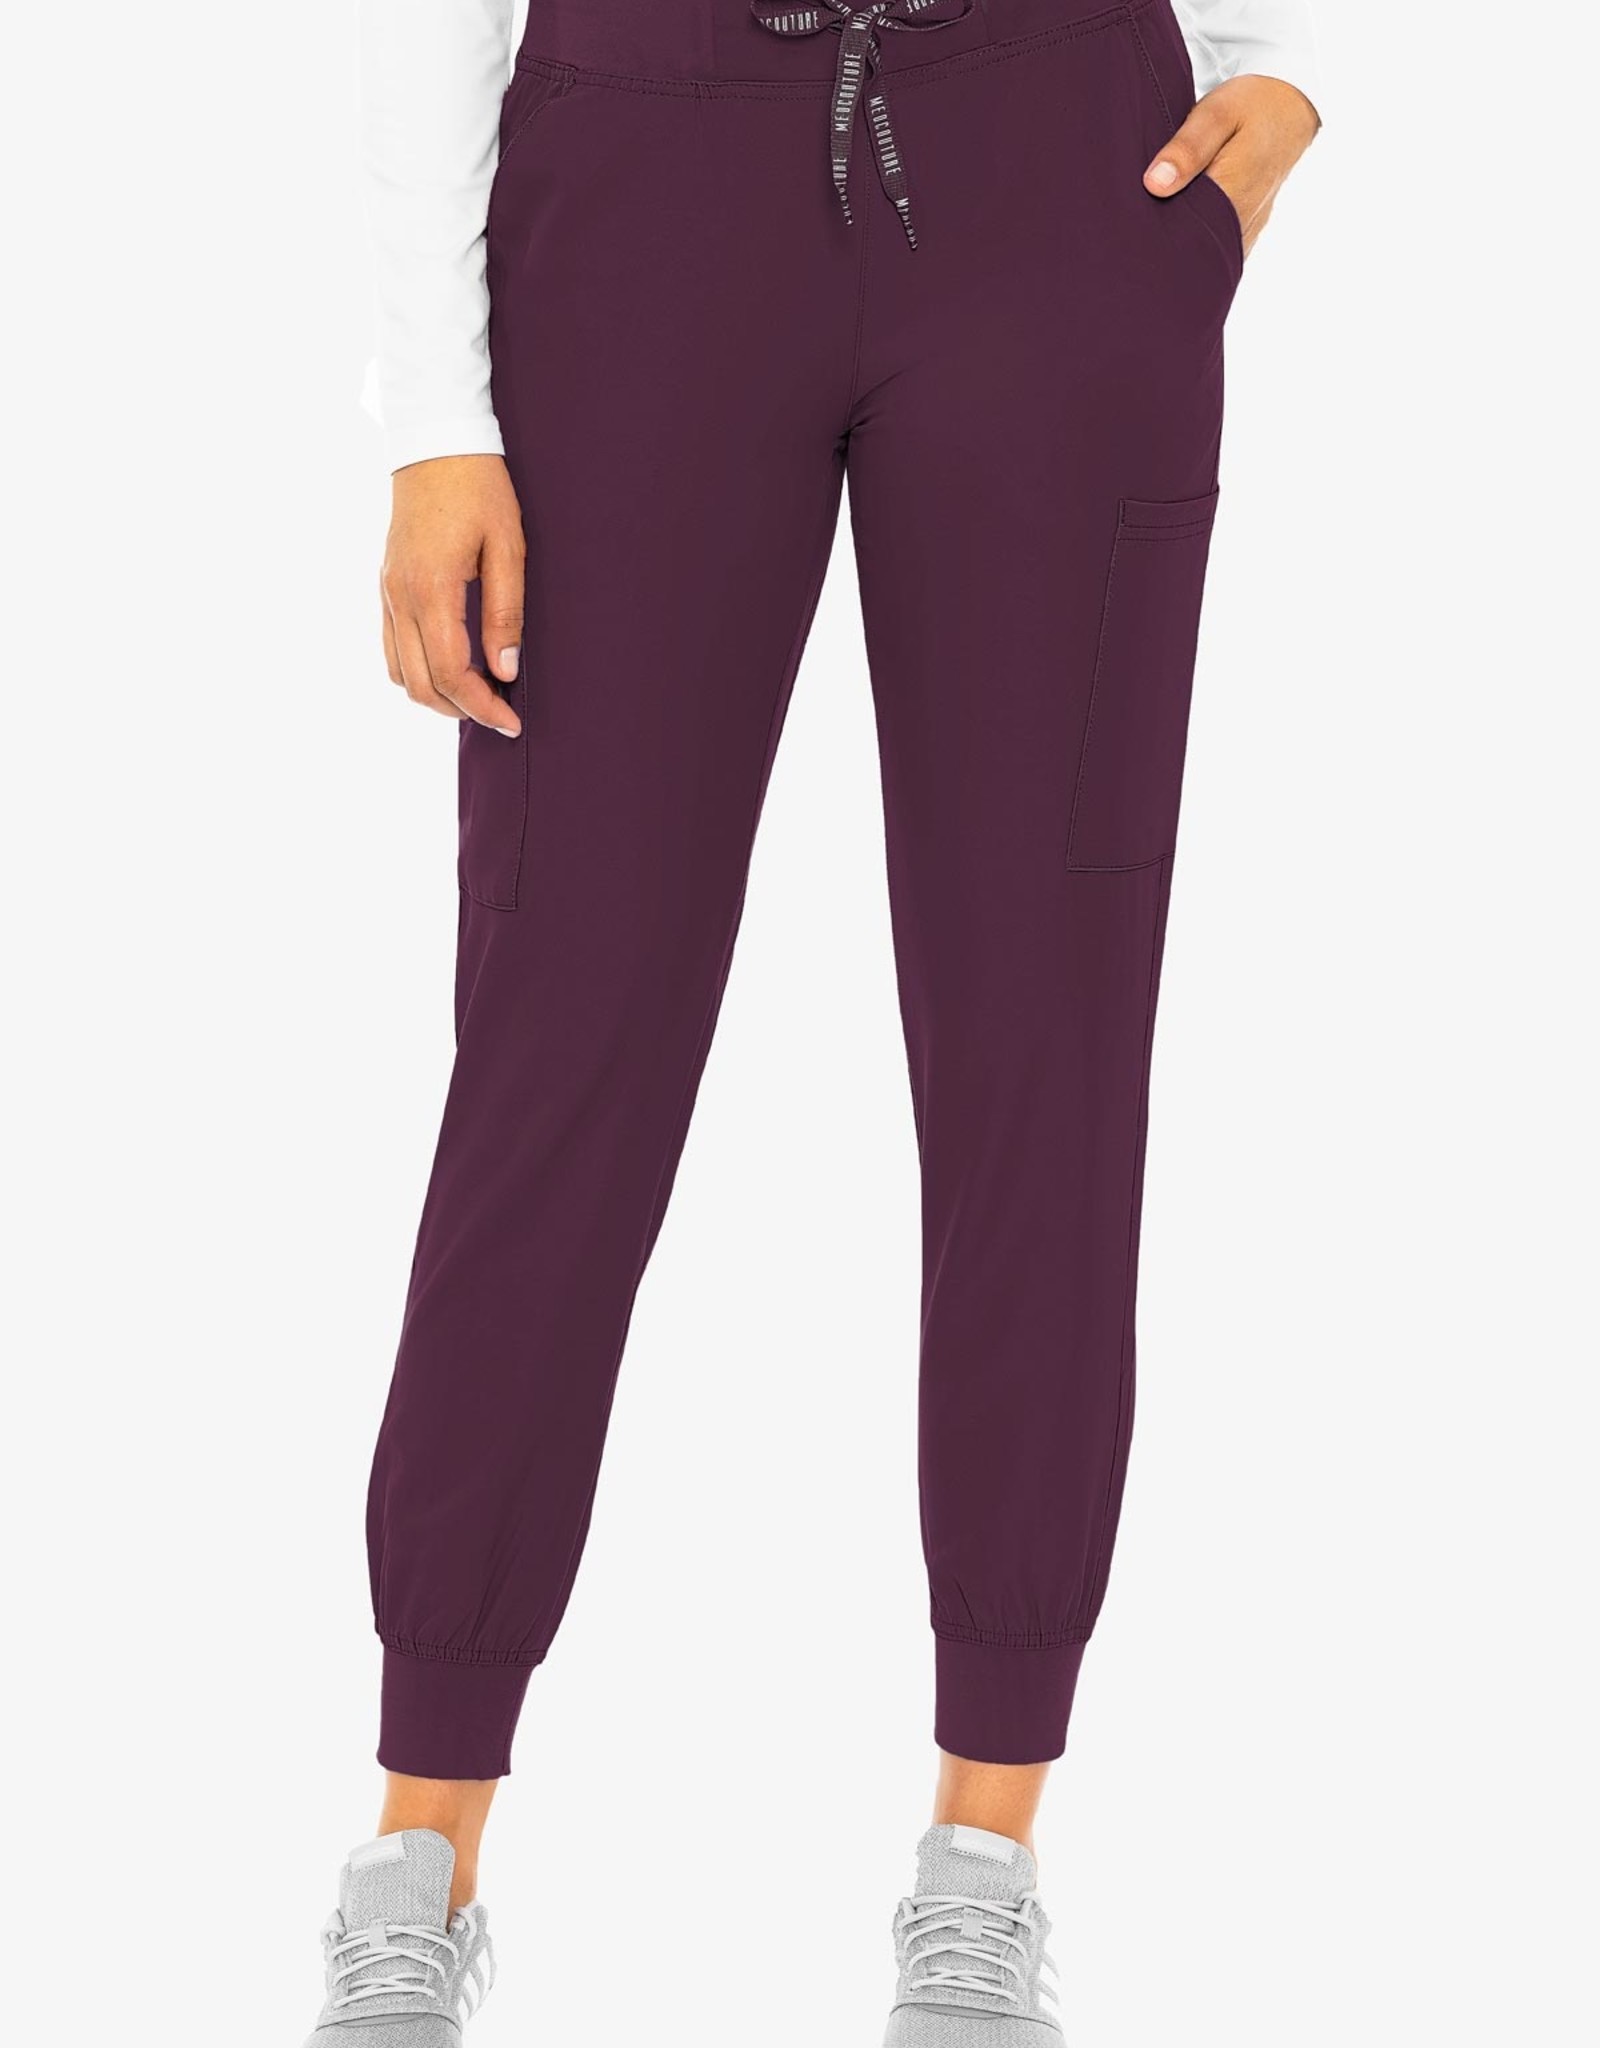 Med Couture Insight Women's Jogger Pant (Petite)